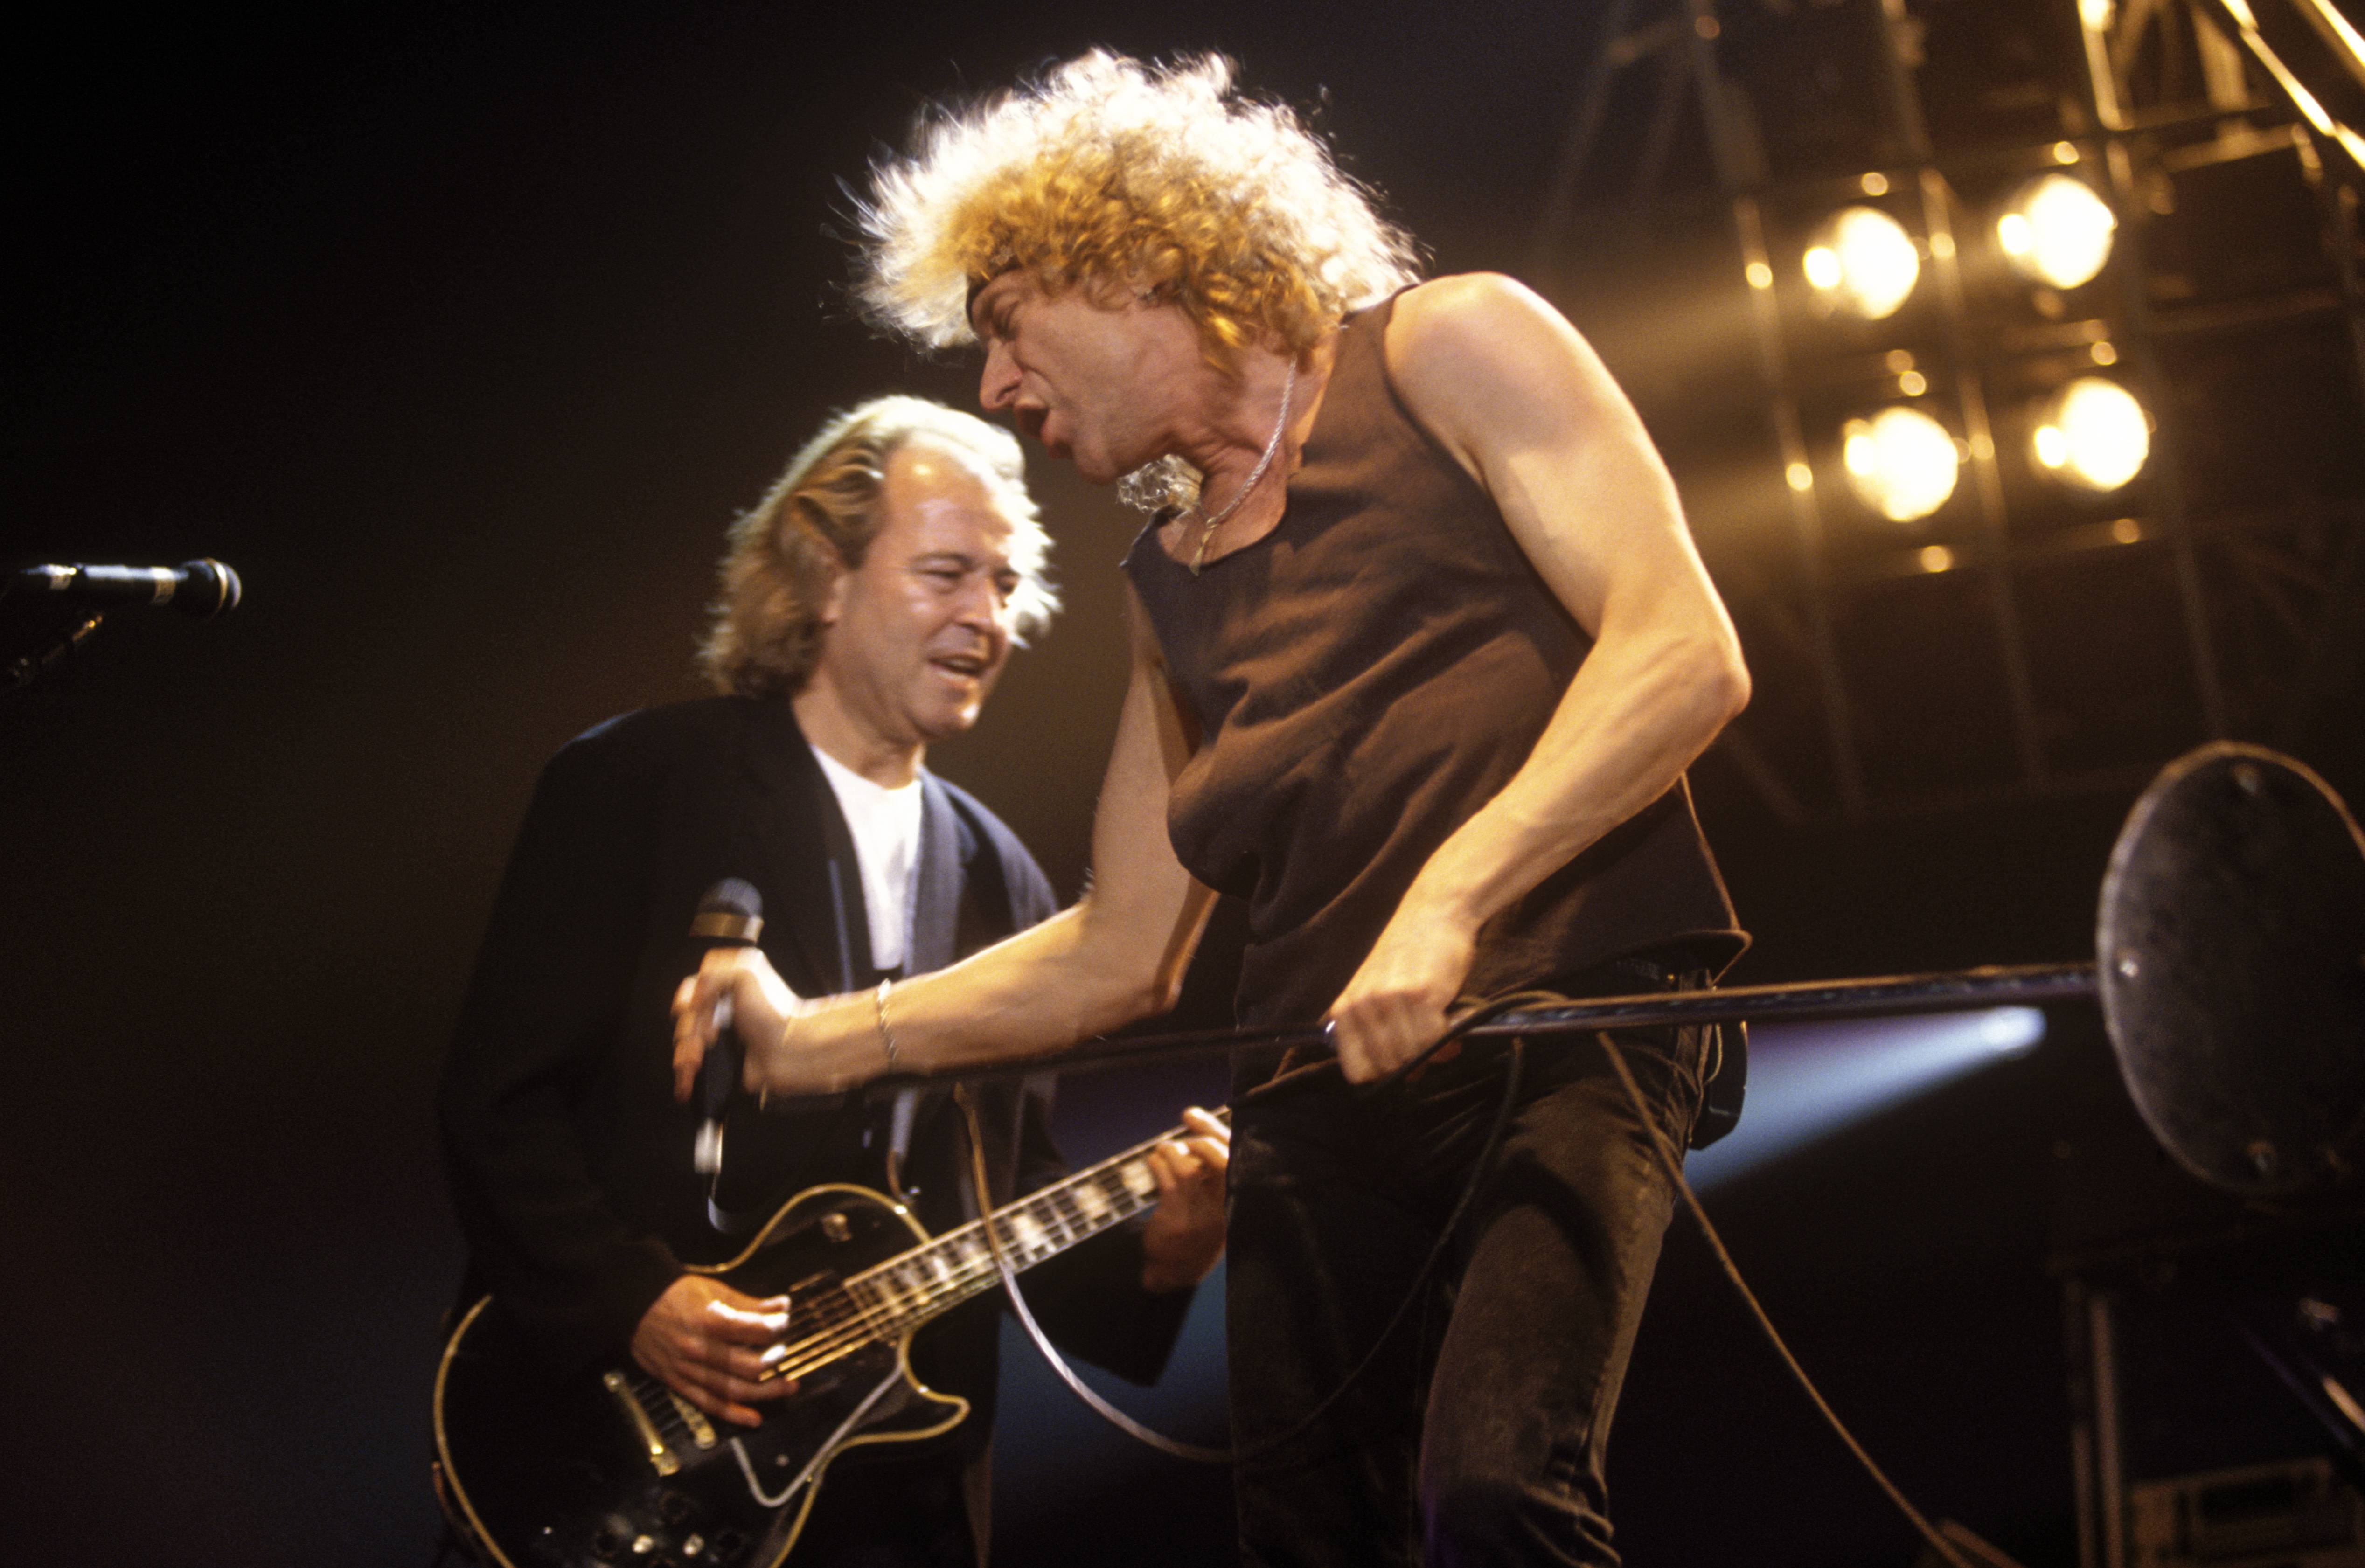 (L to R): Mick Jones and Lou Gramm of Foreigner